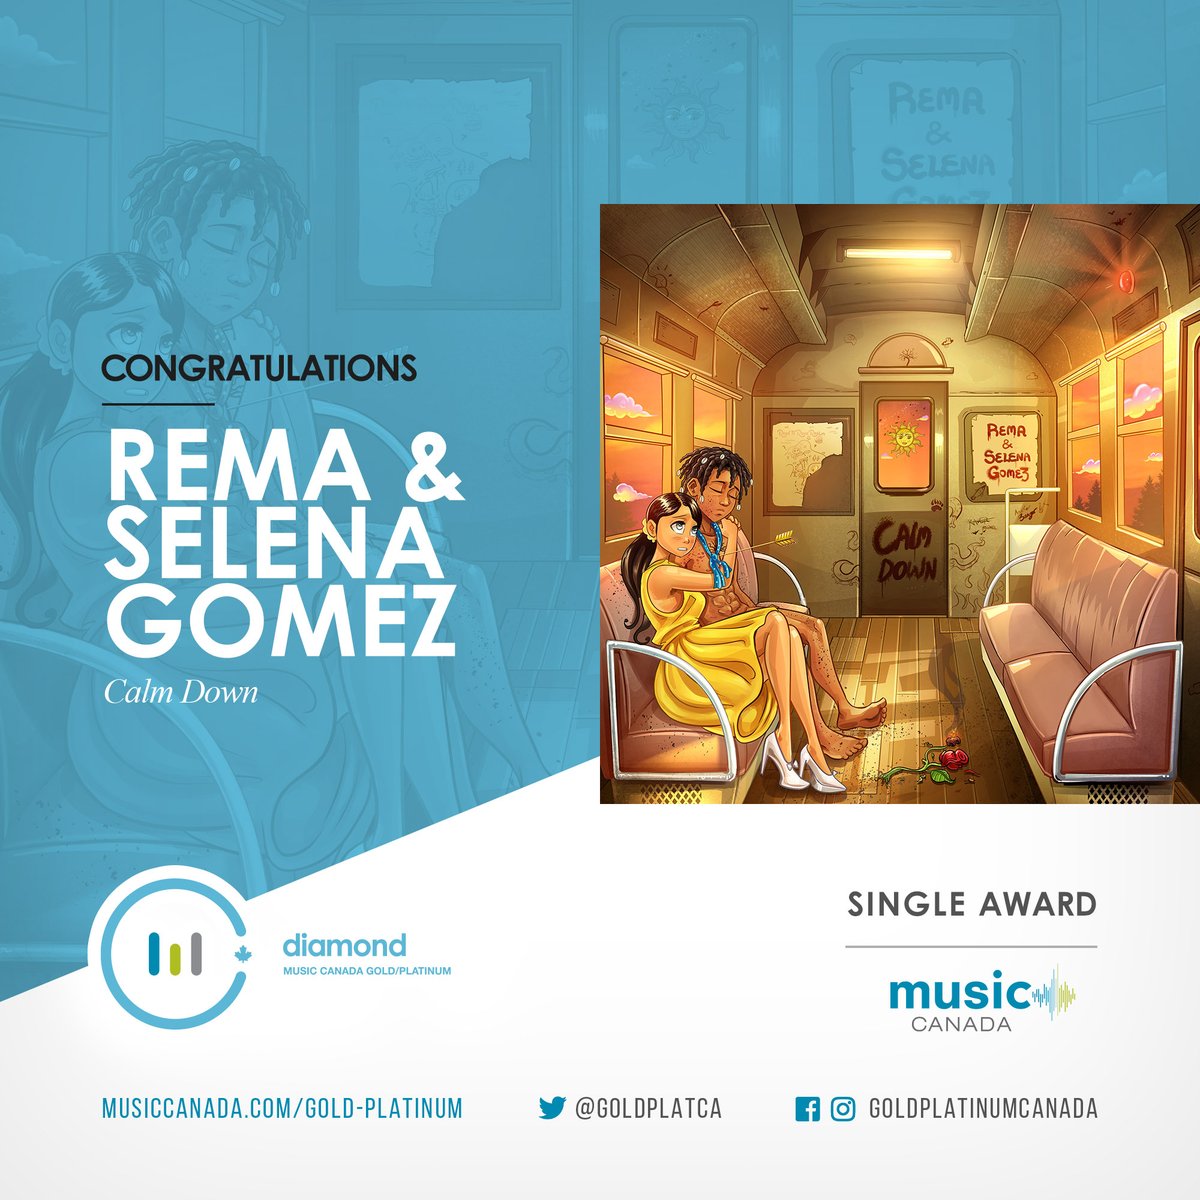 Huge congratulations to @heisrema and @selenagomez on achieving Diamond Single certification in Canada for their sensational collaboration, 'Calm Down' 🍁💎💿